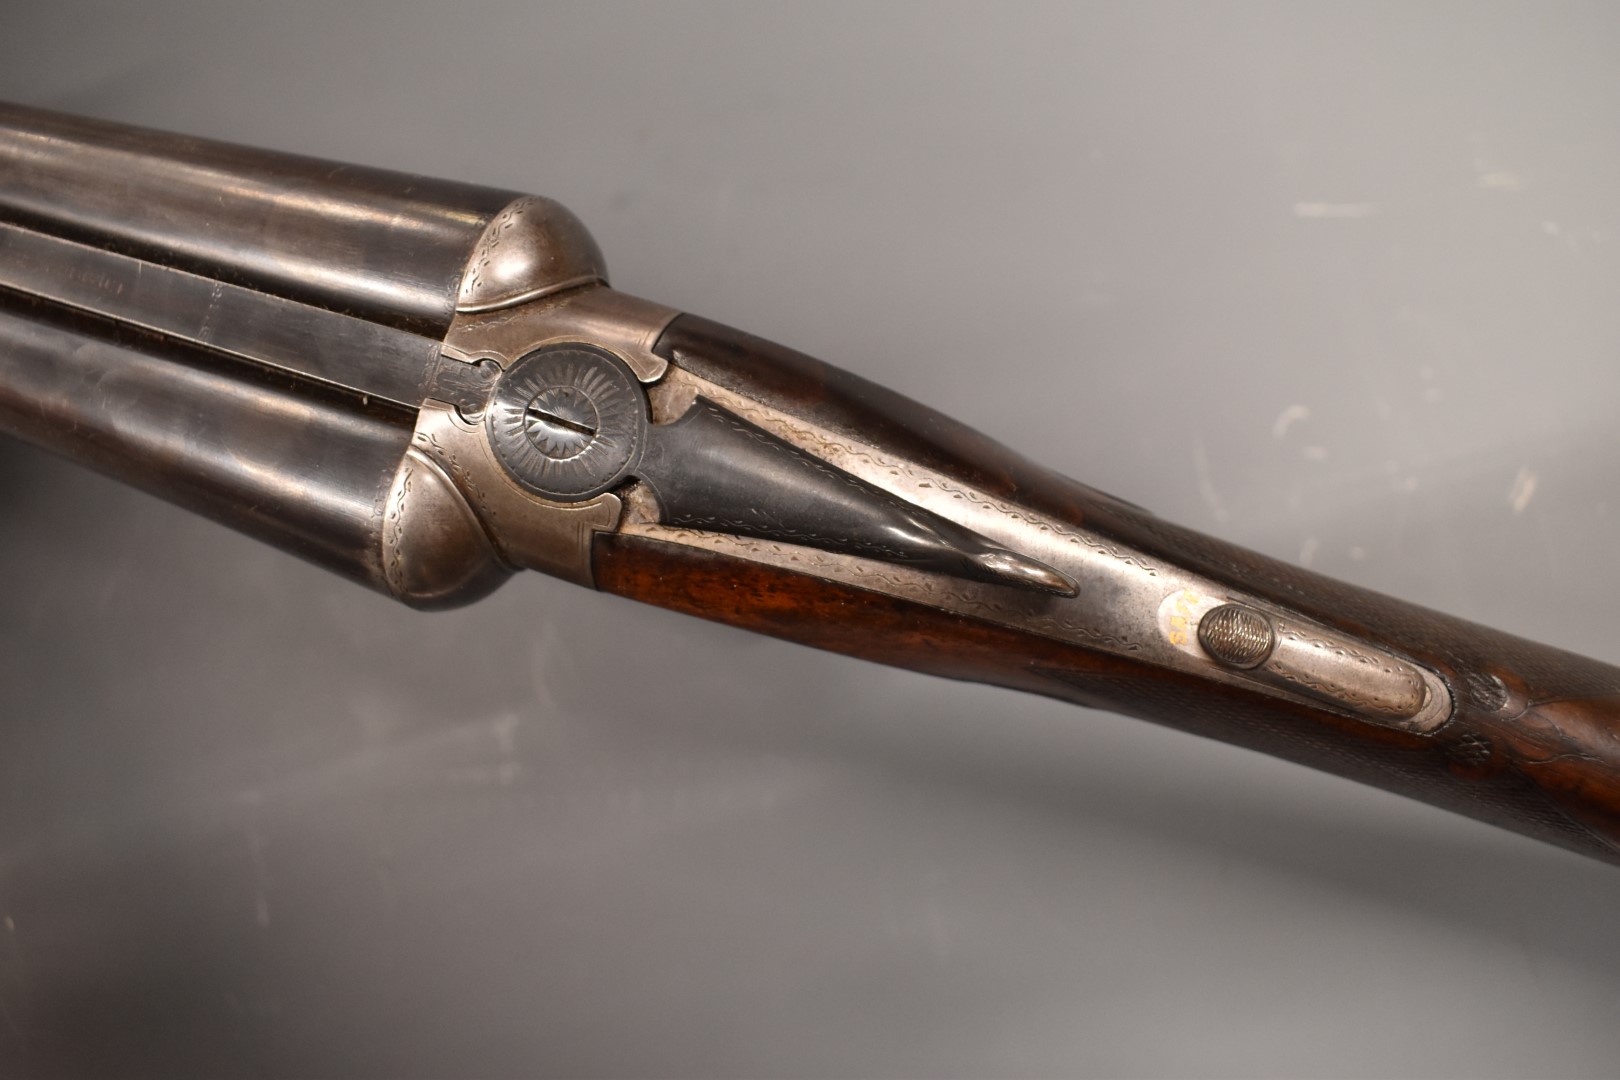 Charles Rosson & Son 12 bore side by side ejector shotgun with named lock, border engraved lock, - Image 11 of 11